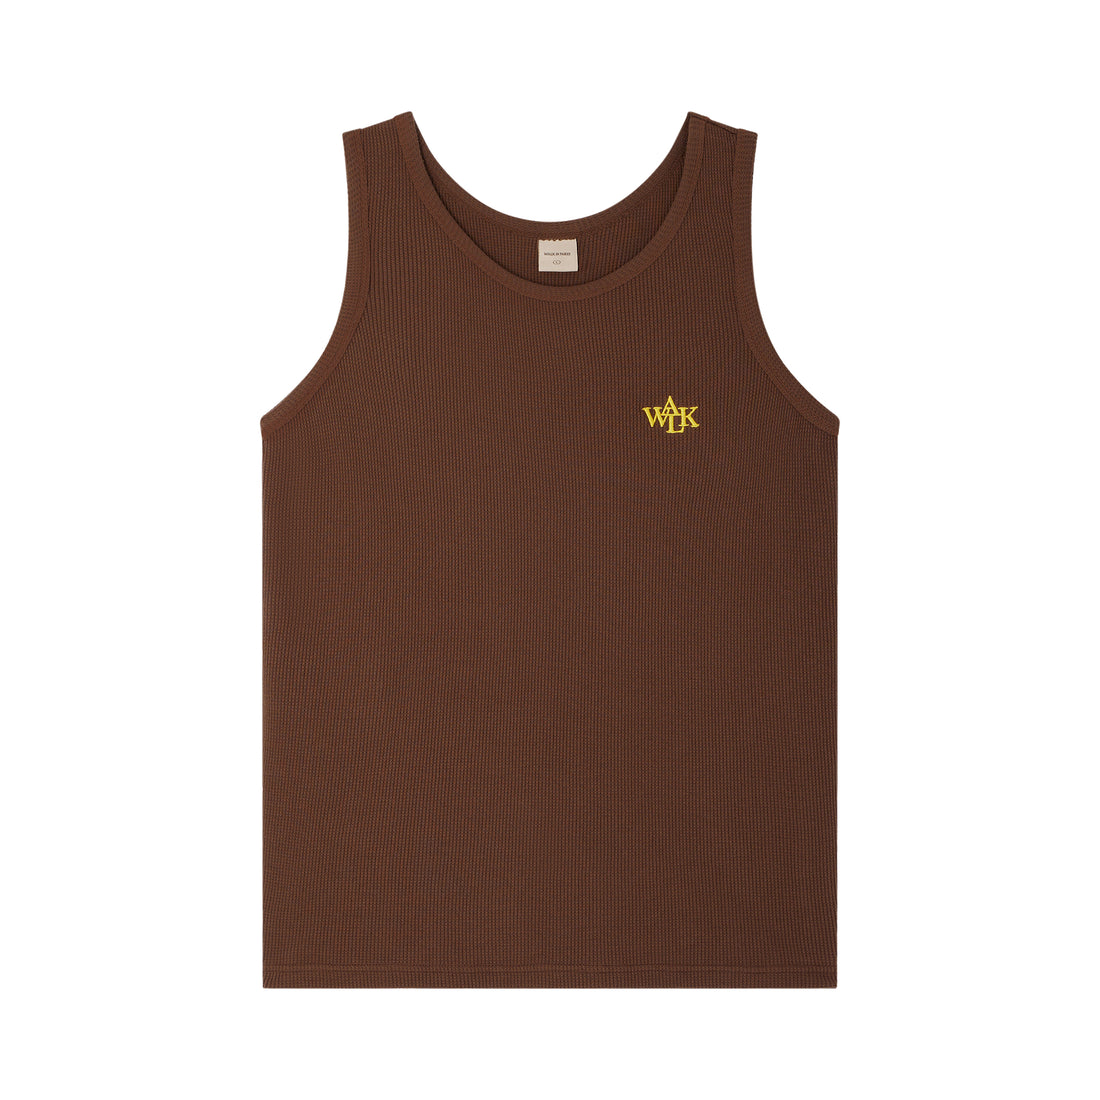 The brown embroidered tank top